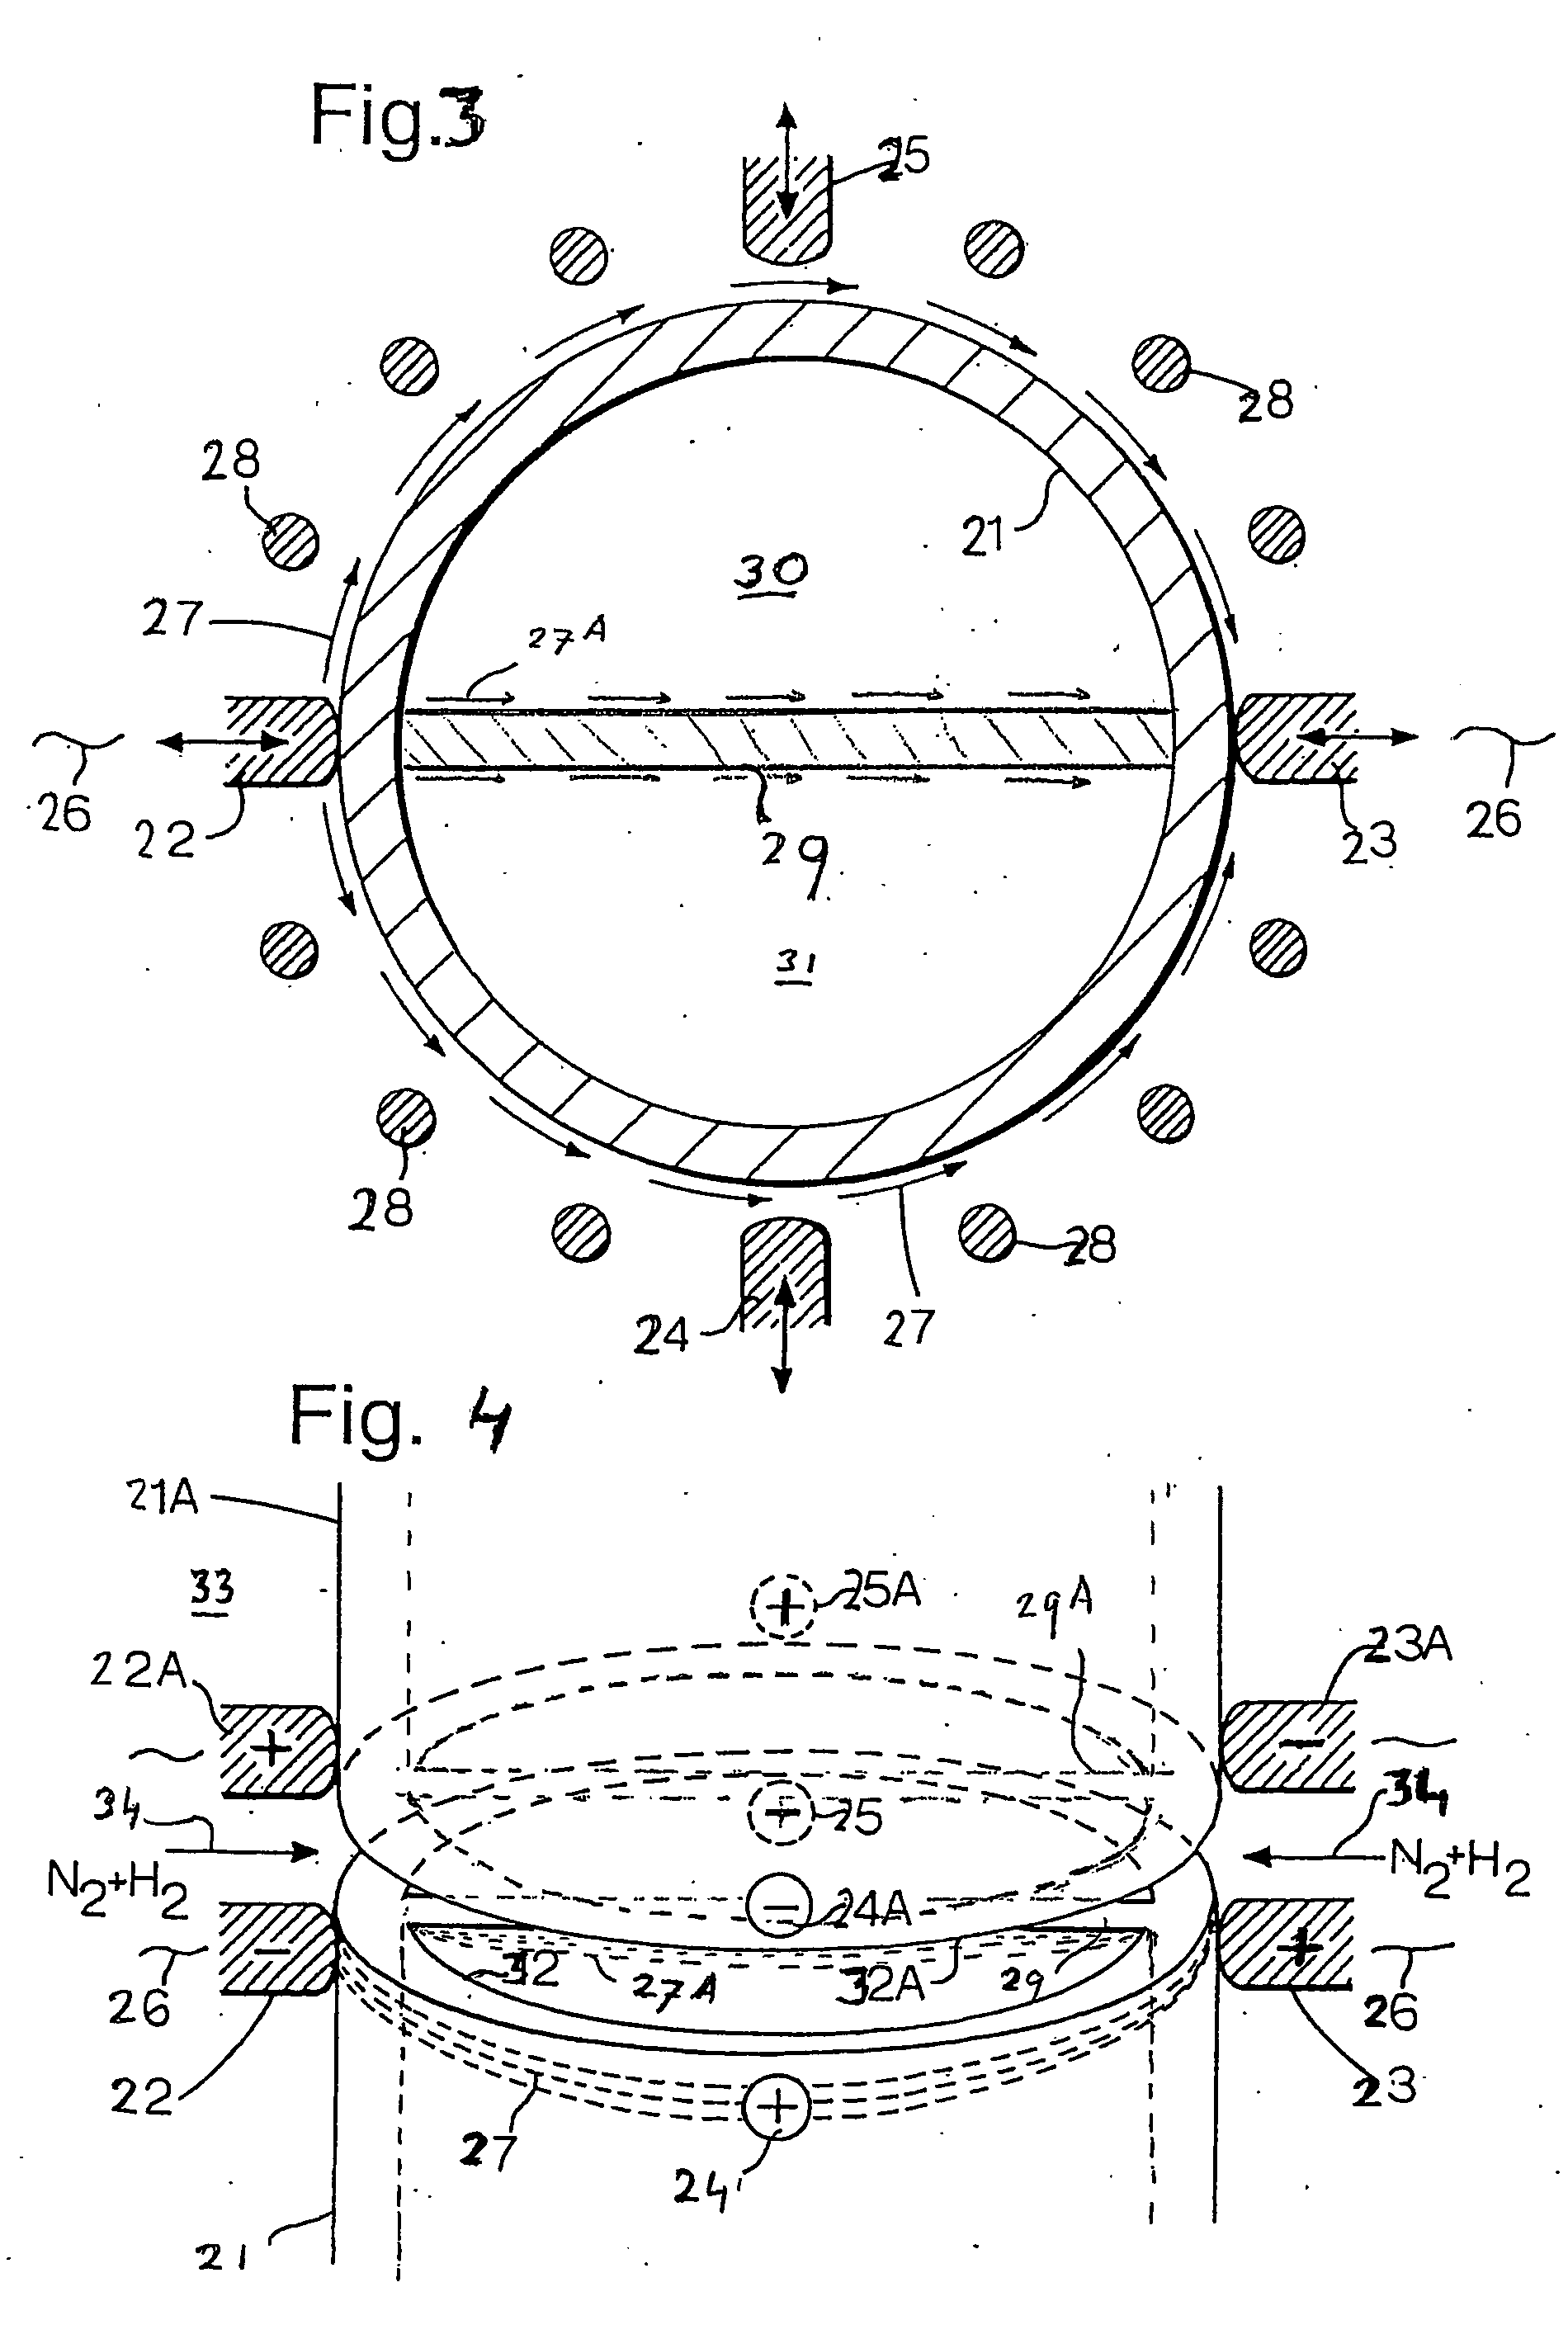 Method for interconnecting tubulars by forge welding